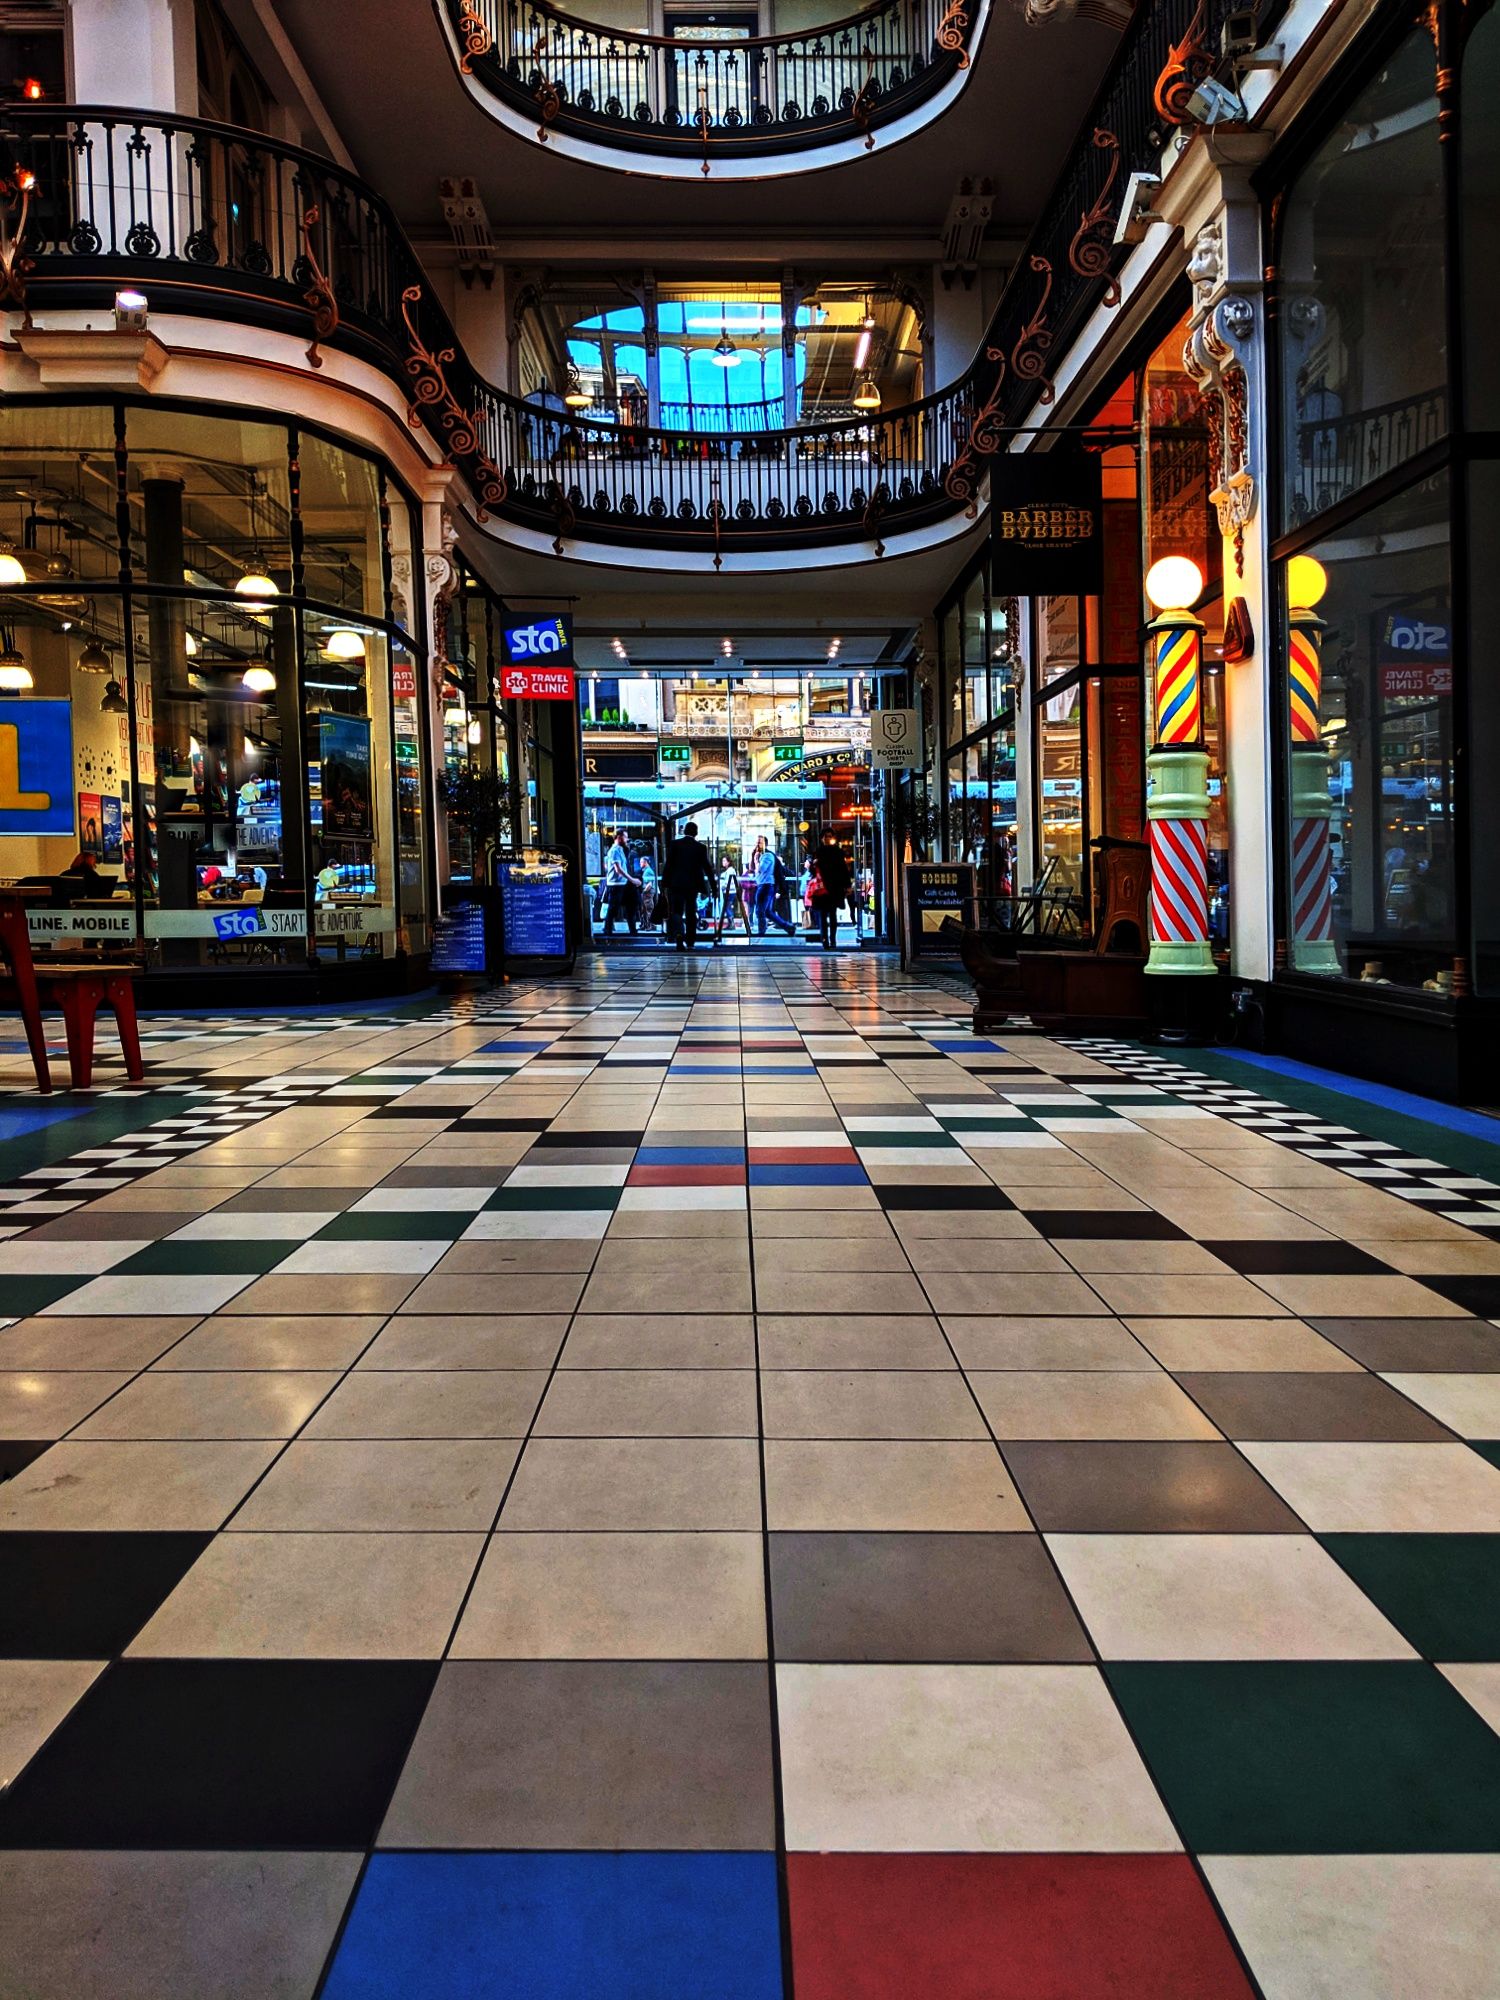 Barton Arcade Manchester UK. Get down low to use leading lines in the floor.